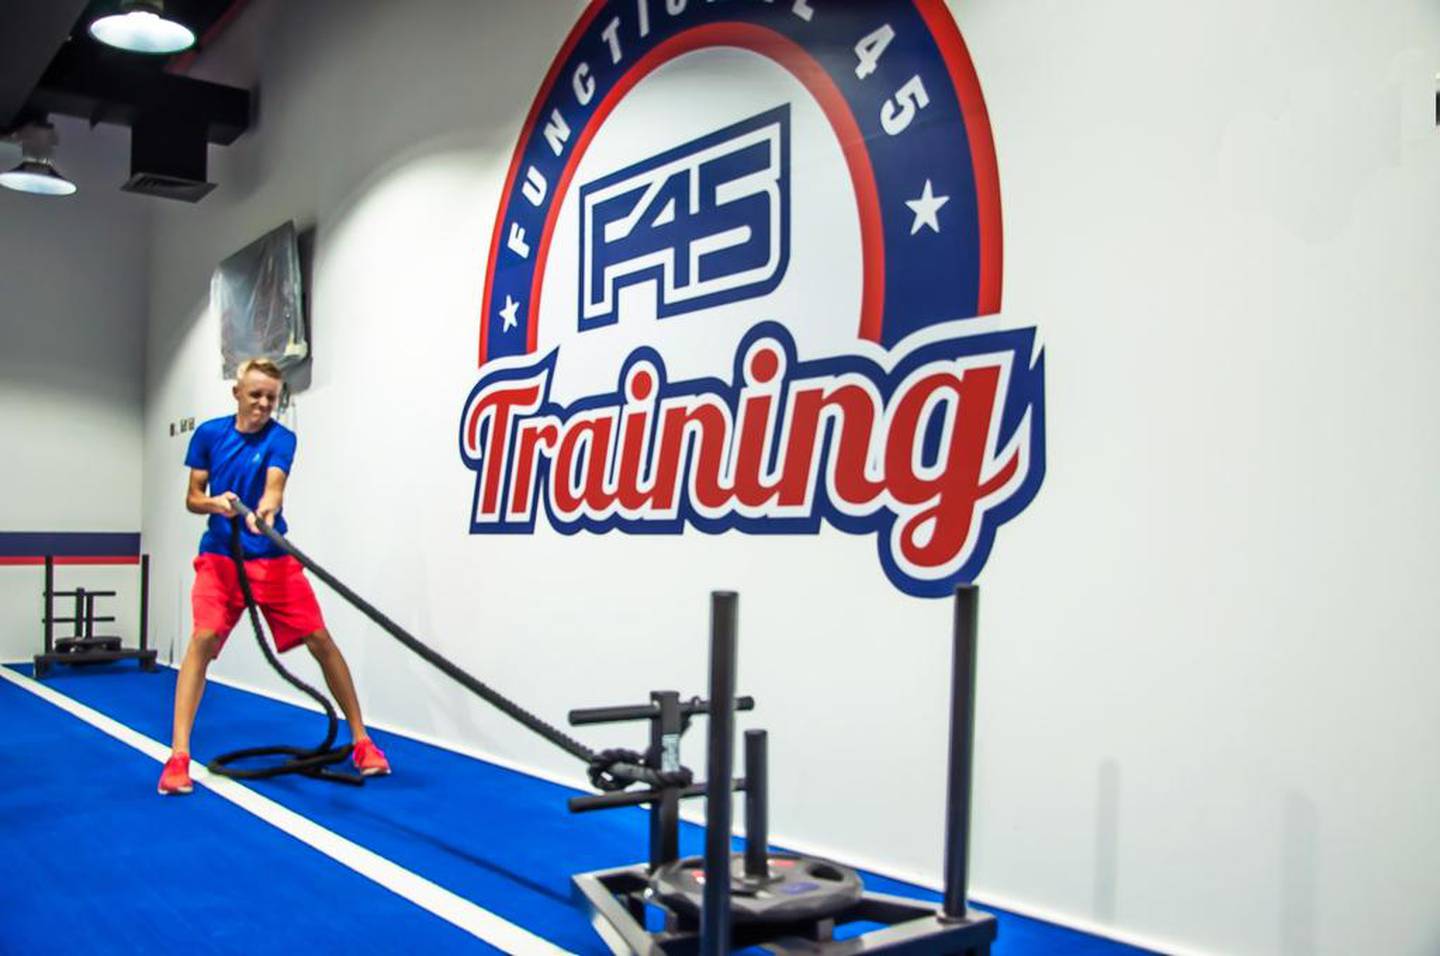 F45 Training is built on its group class offerings. Photo by Adam Meyer